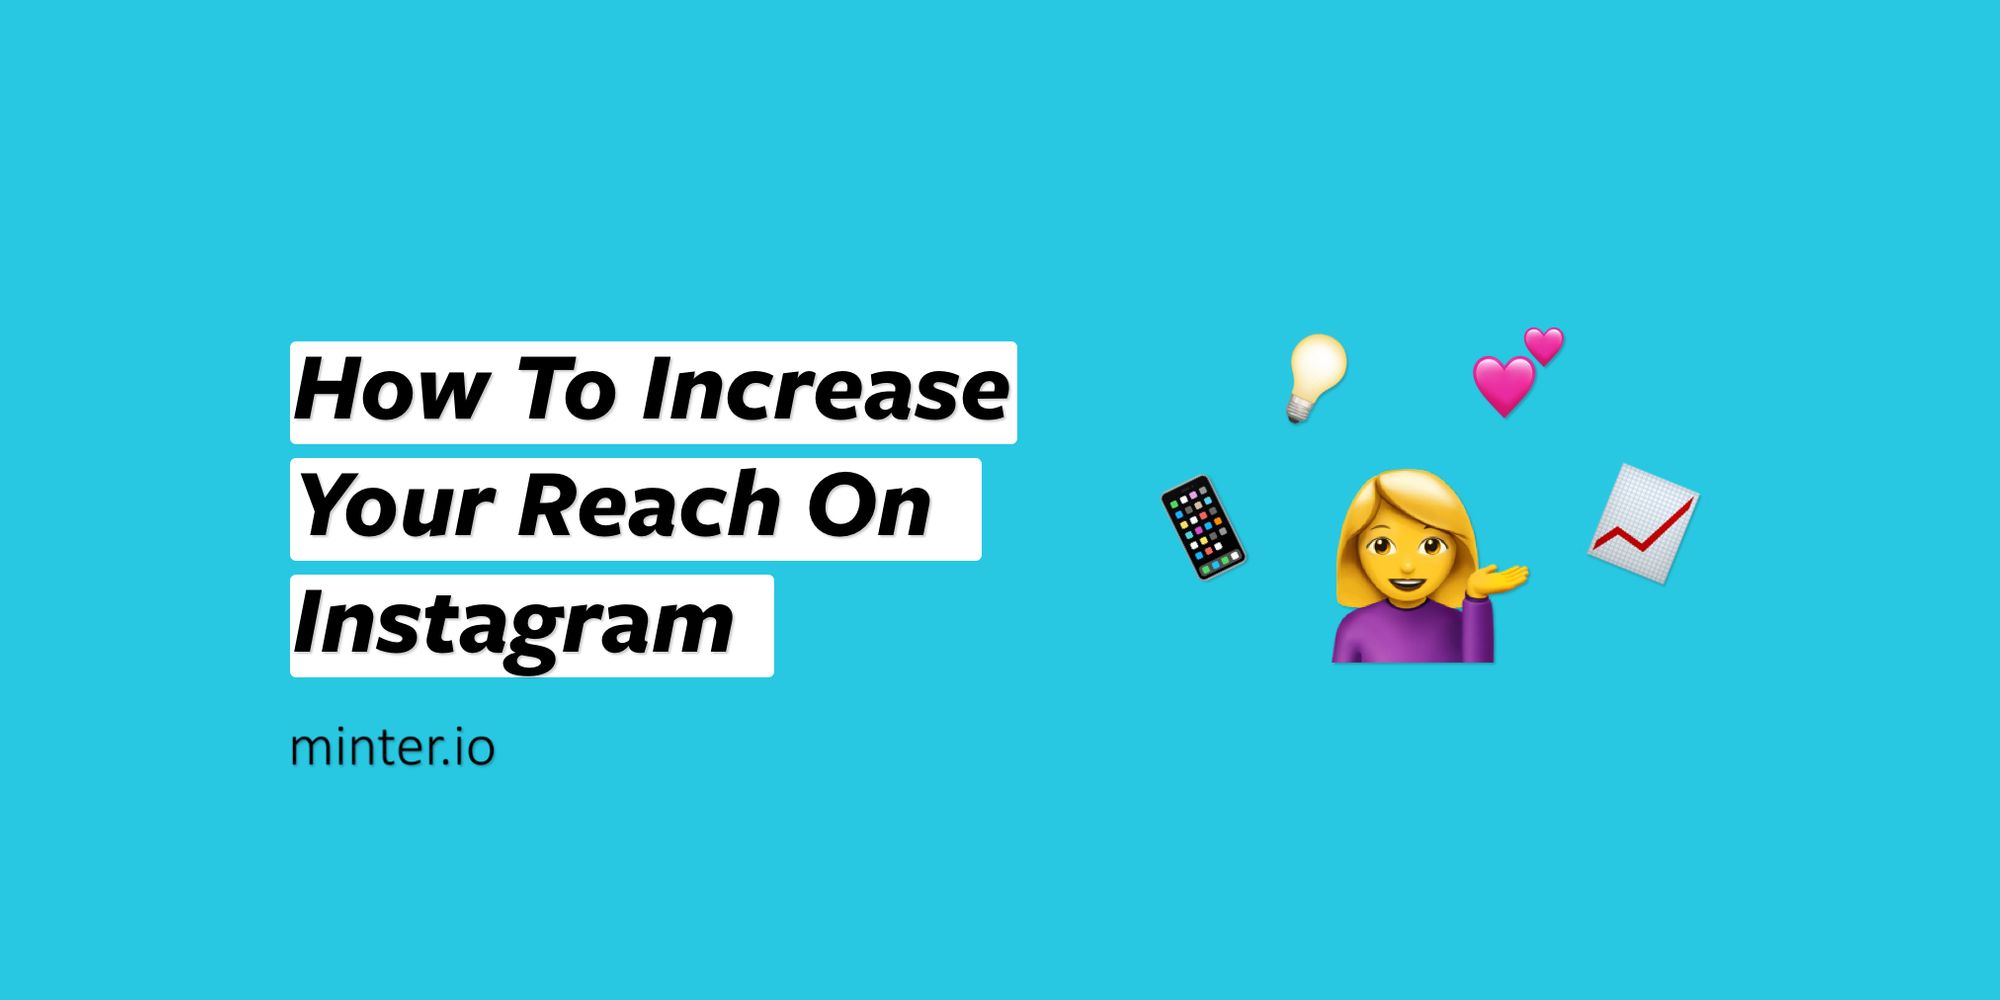 How To Increase Your Reach On Instagram